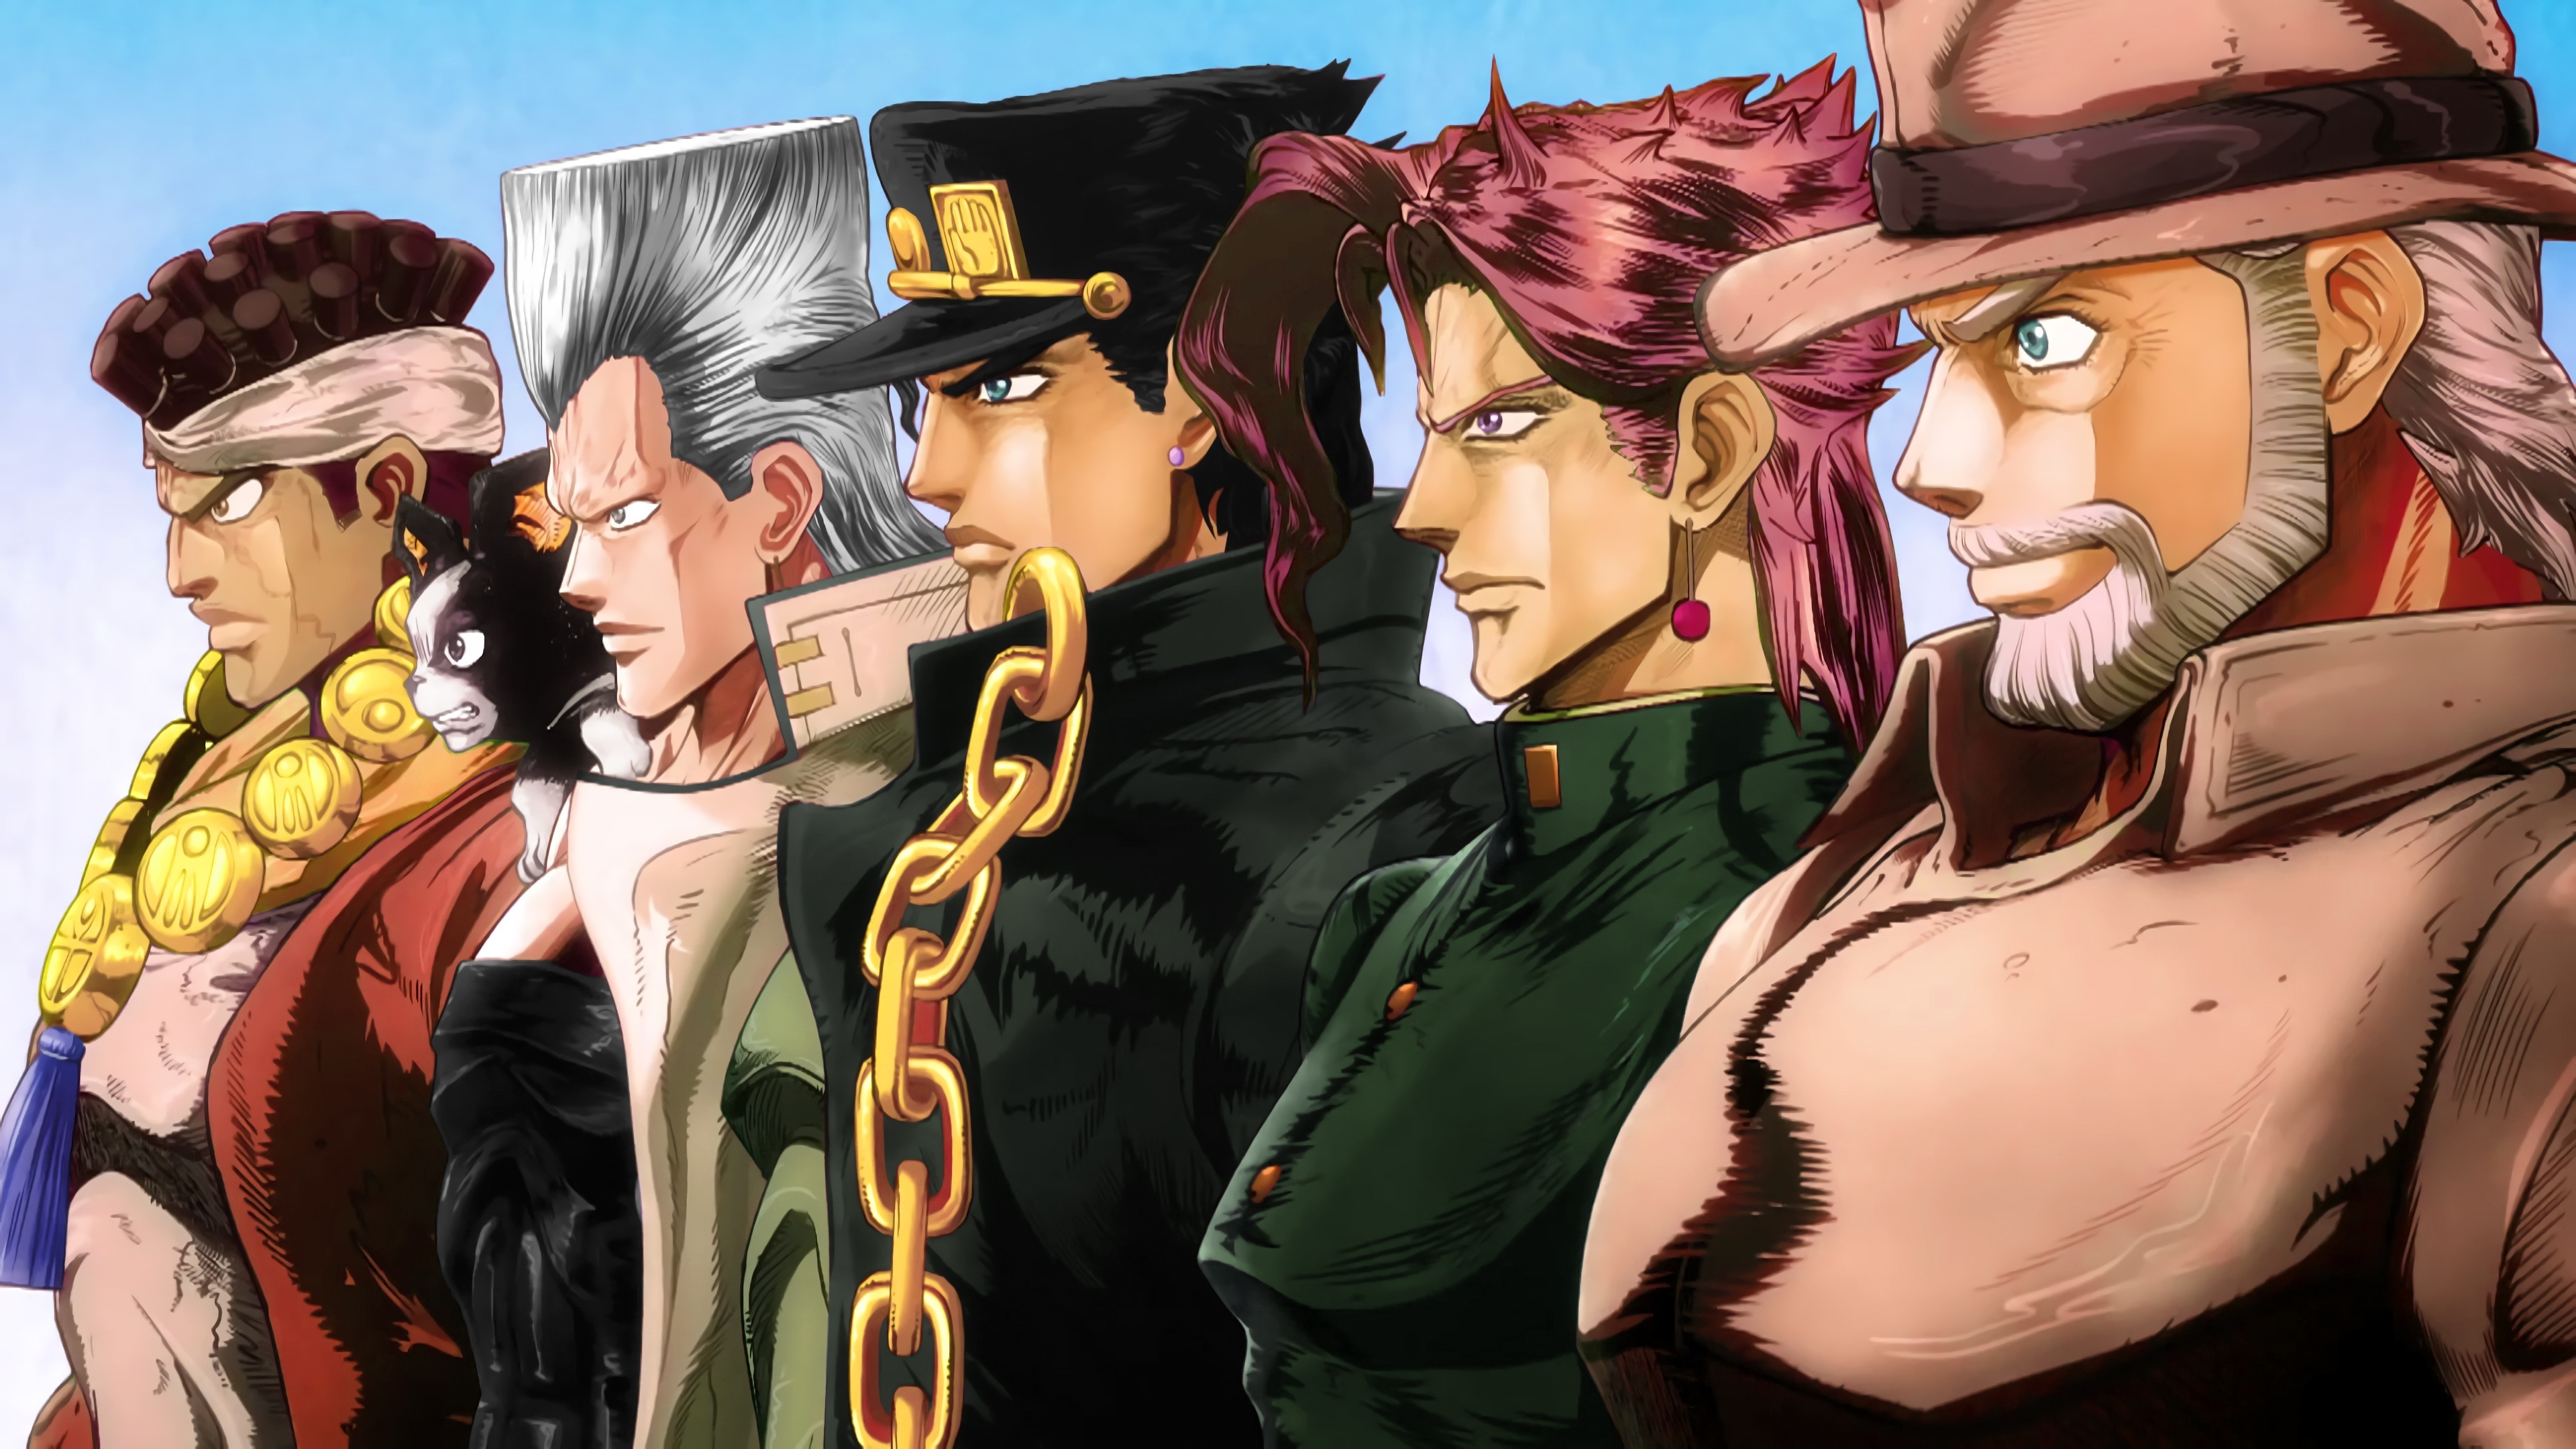 Download 3840x2160 Wallpaper Anime Boys Jojo S Bizarre Adventure Anime 4k Uhd 16 9 Widescreen 3840x2160 Hd Image Background 3886 You don't know what 4k resolution is? bizarre adventure anime 4k uhd